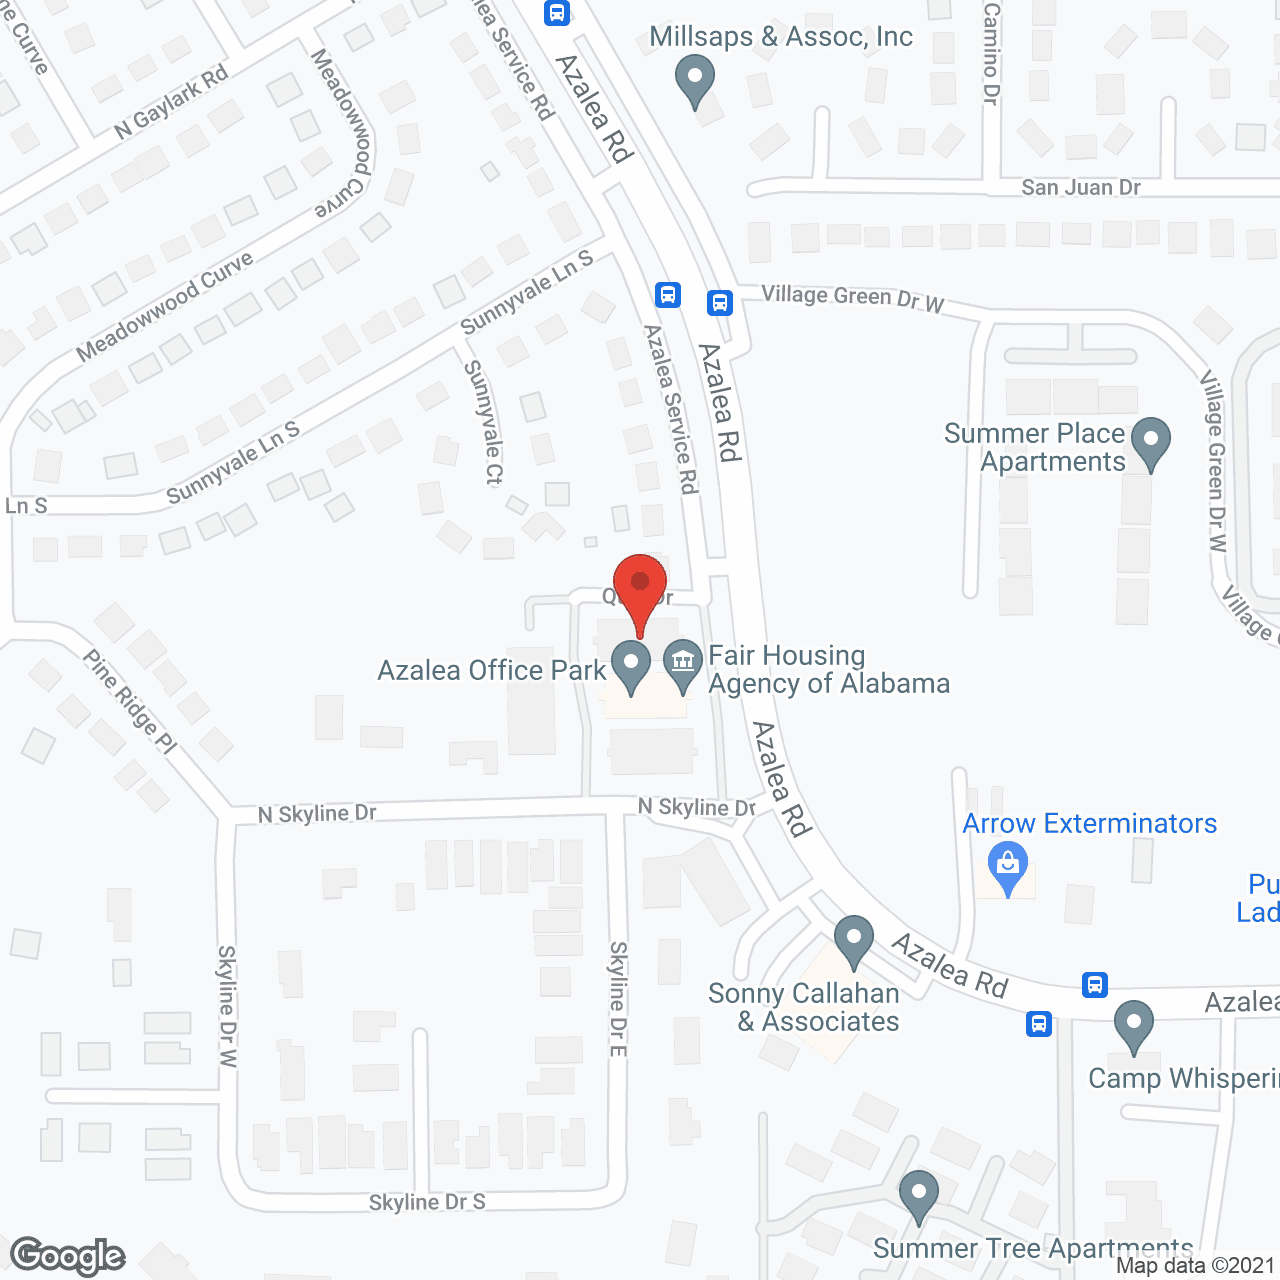 Home Care Associates in google map